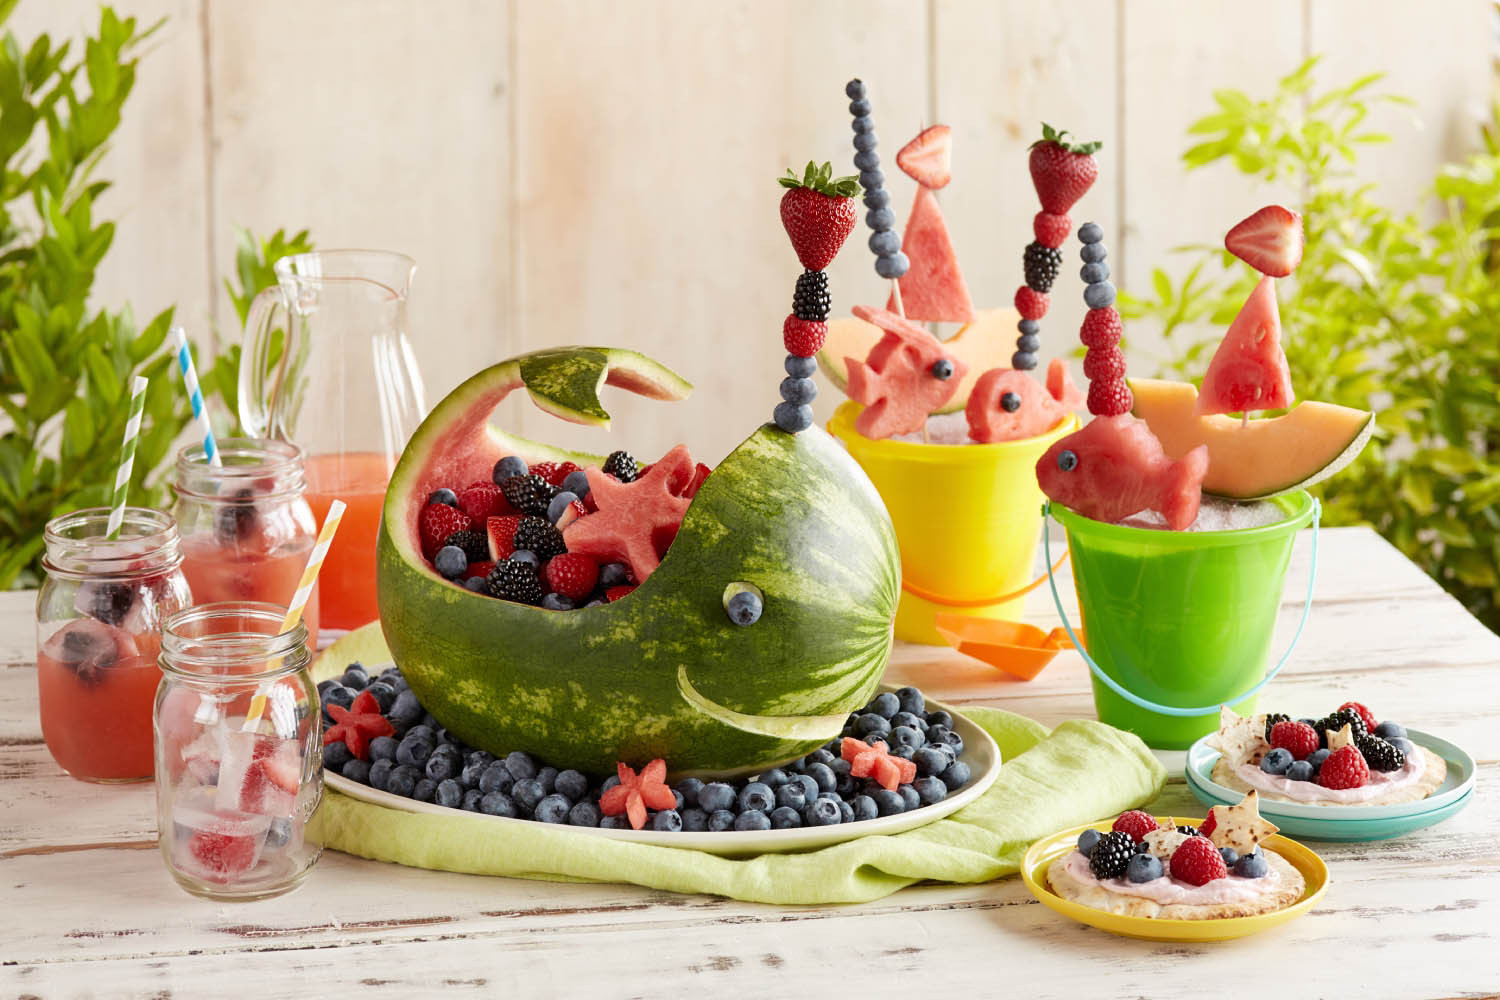 Beach Party Decorations Ideas
 Splash into Summer with a Berry Beach Party